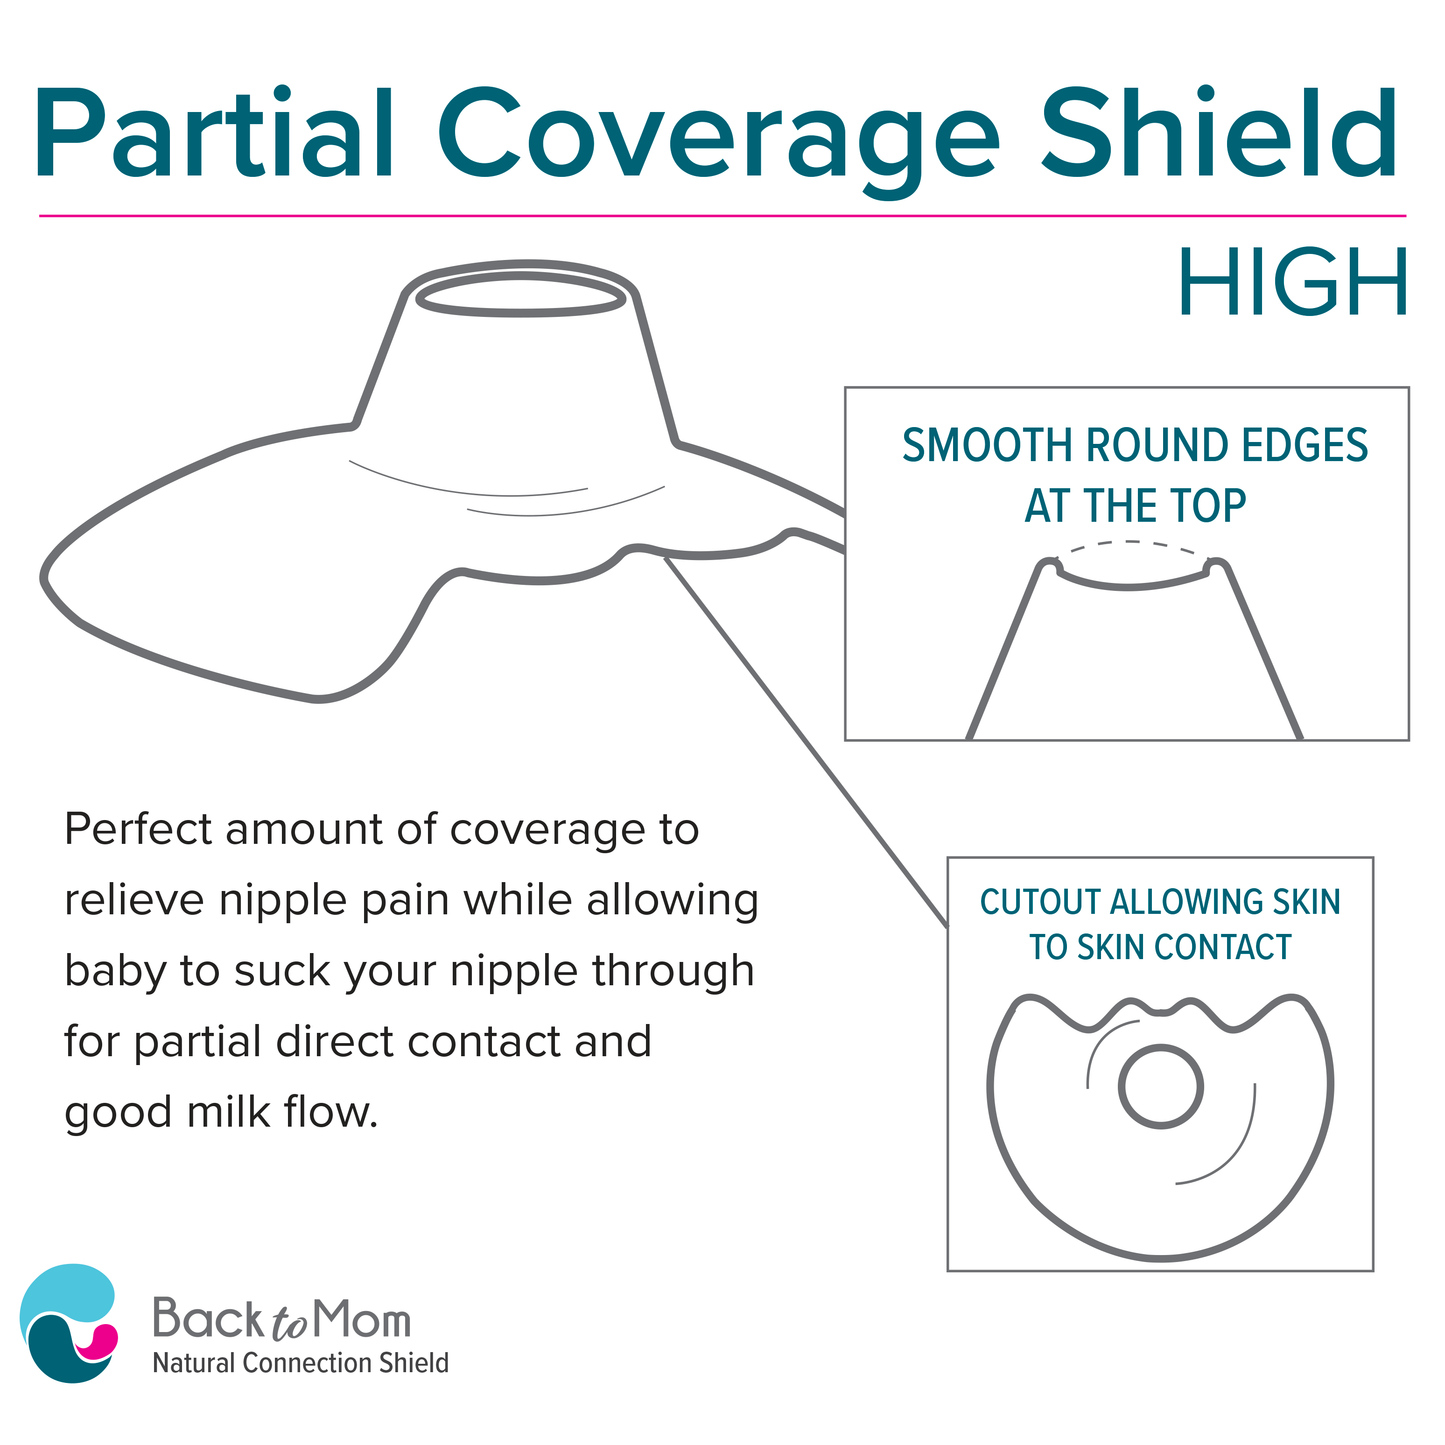 Fix low milk supply from nipple shield with this direct contact nipple shield. it allows baby to access nipple while using a nipple shield. it helps heal nipples from blister, cracks, cut or bleeding nipples from breastfeeding. Breastfeeding does not need to be painful. This is the best nipple shield on the market and works to heal nipples. 